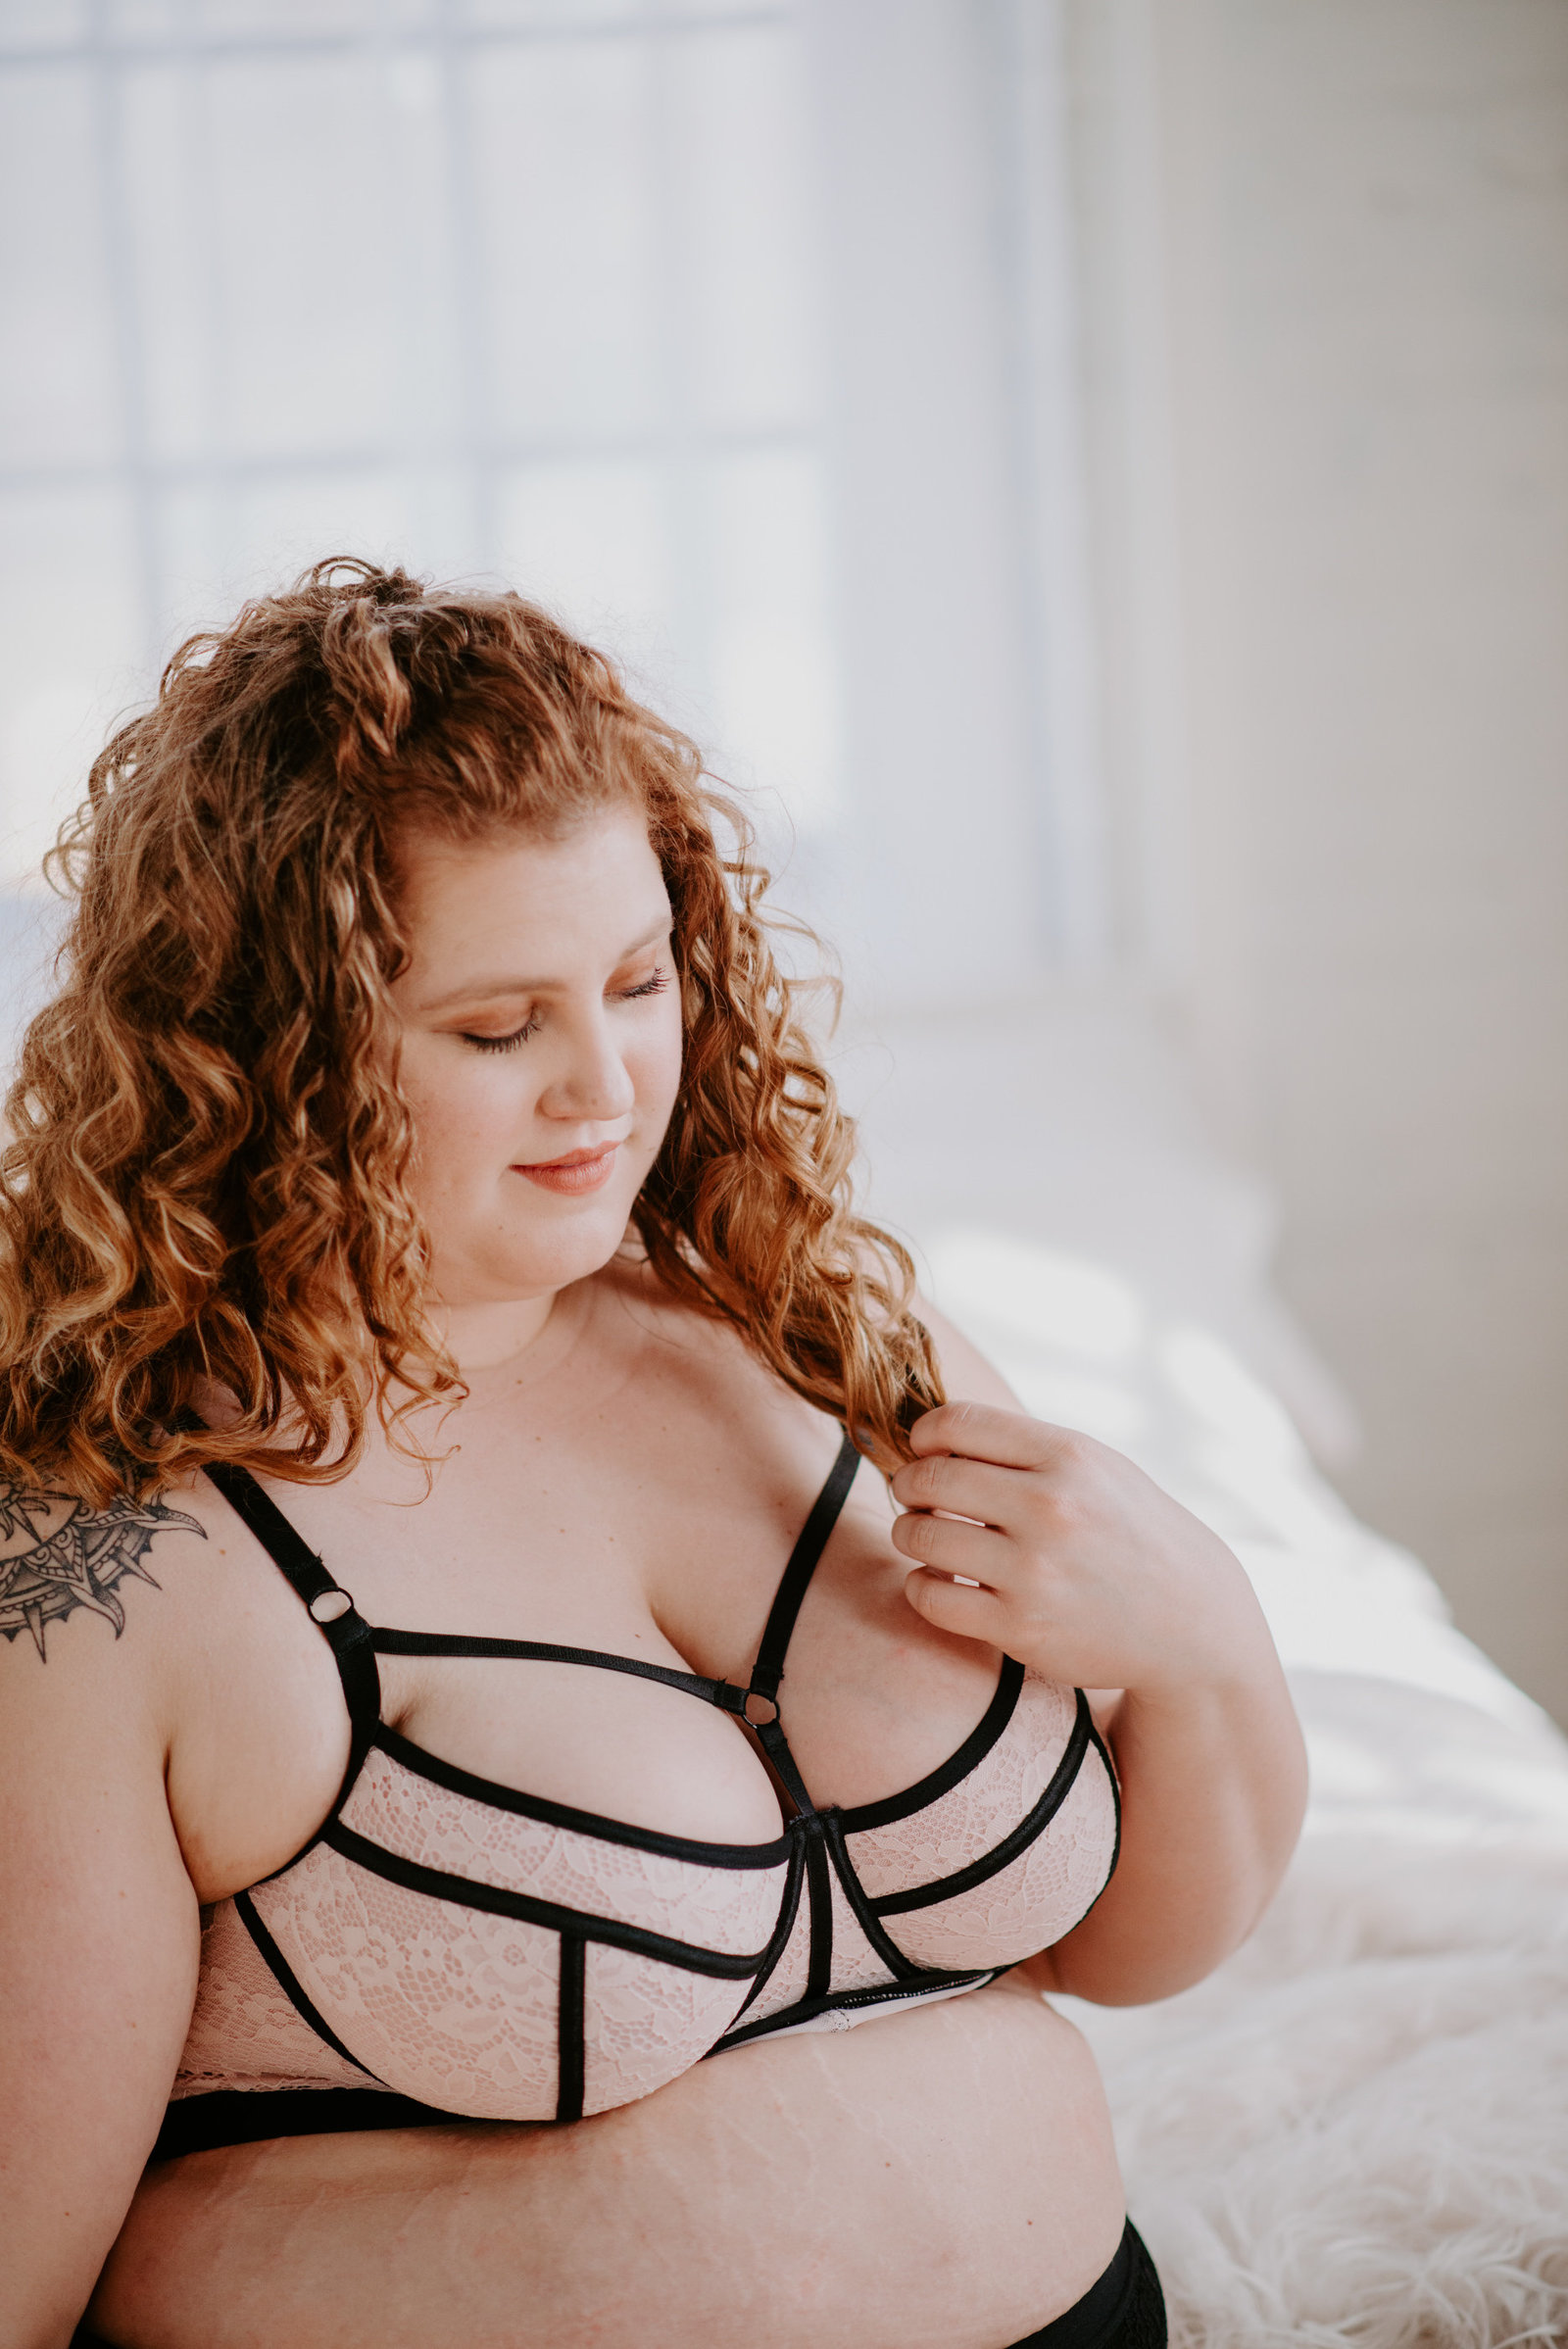 plus size queer femme enjoying her self love boudoir session in Michigan